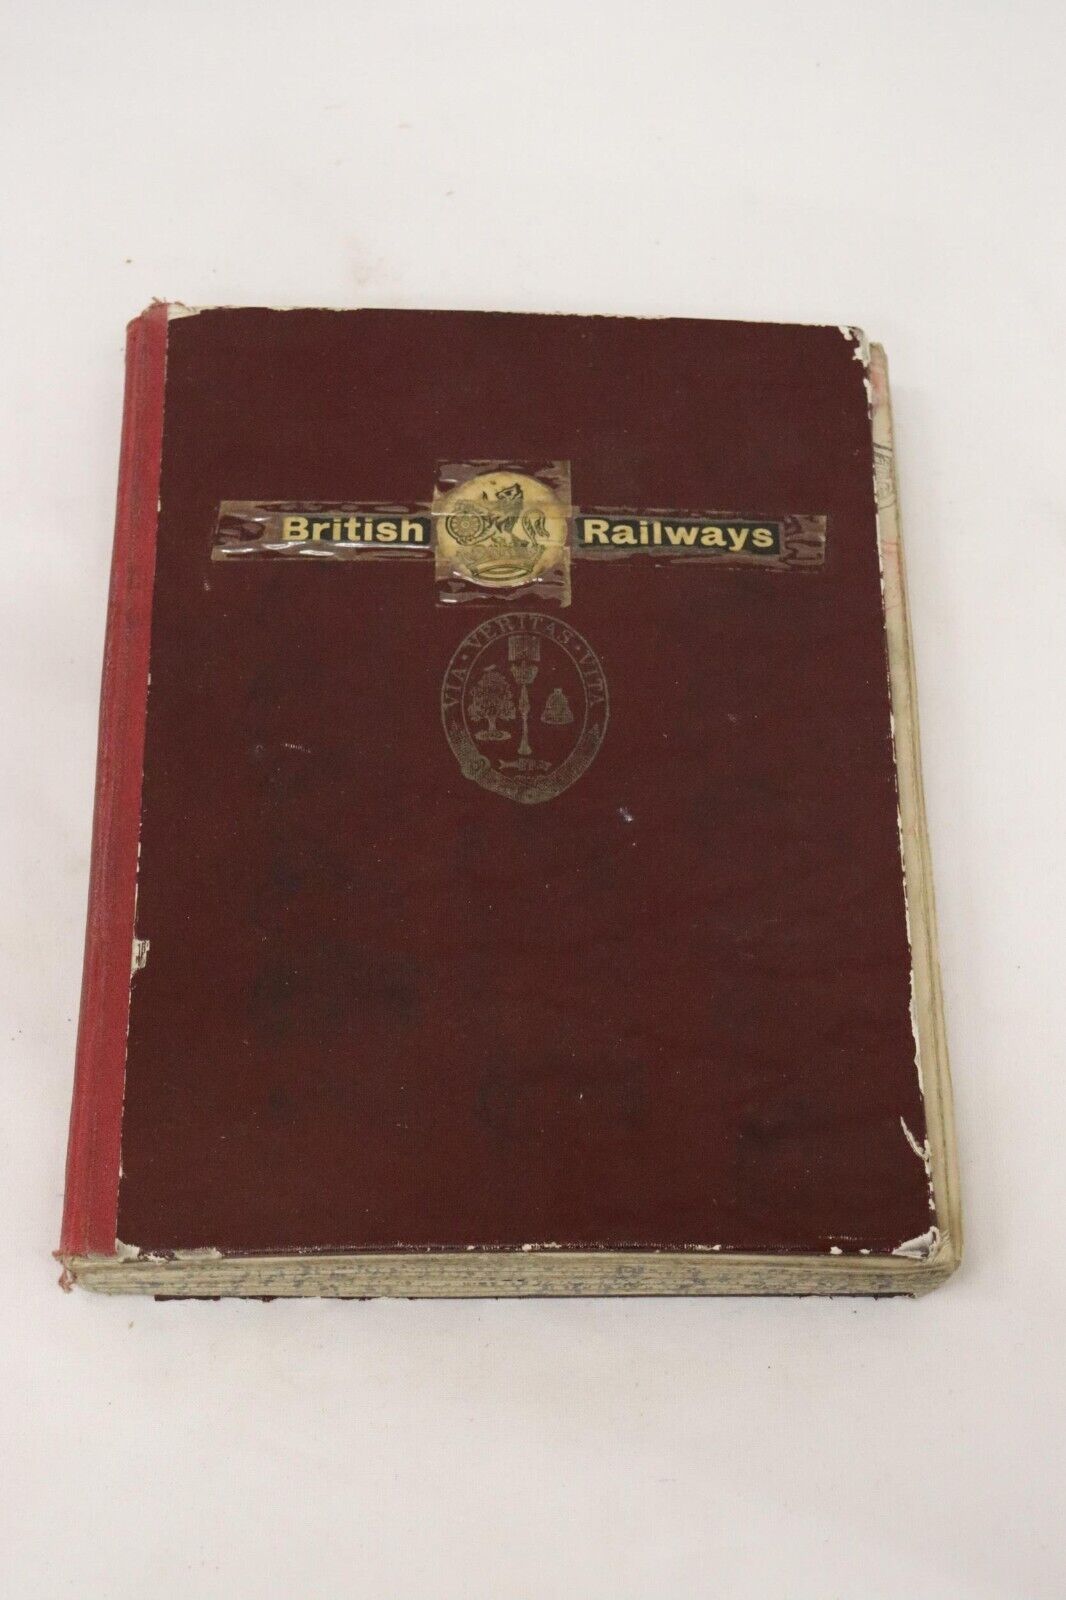 A 1957 BRITISH RAIL TRAINSPOTTERS RECORD BOOK (RARE PART OF HISTORY)